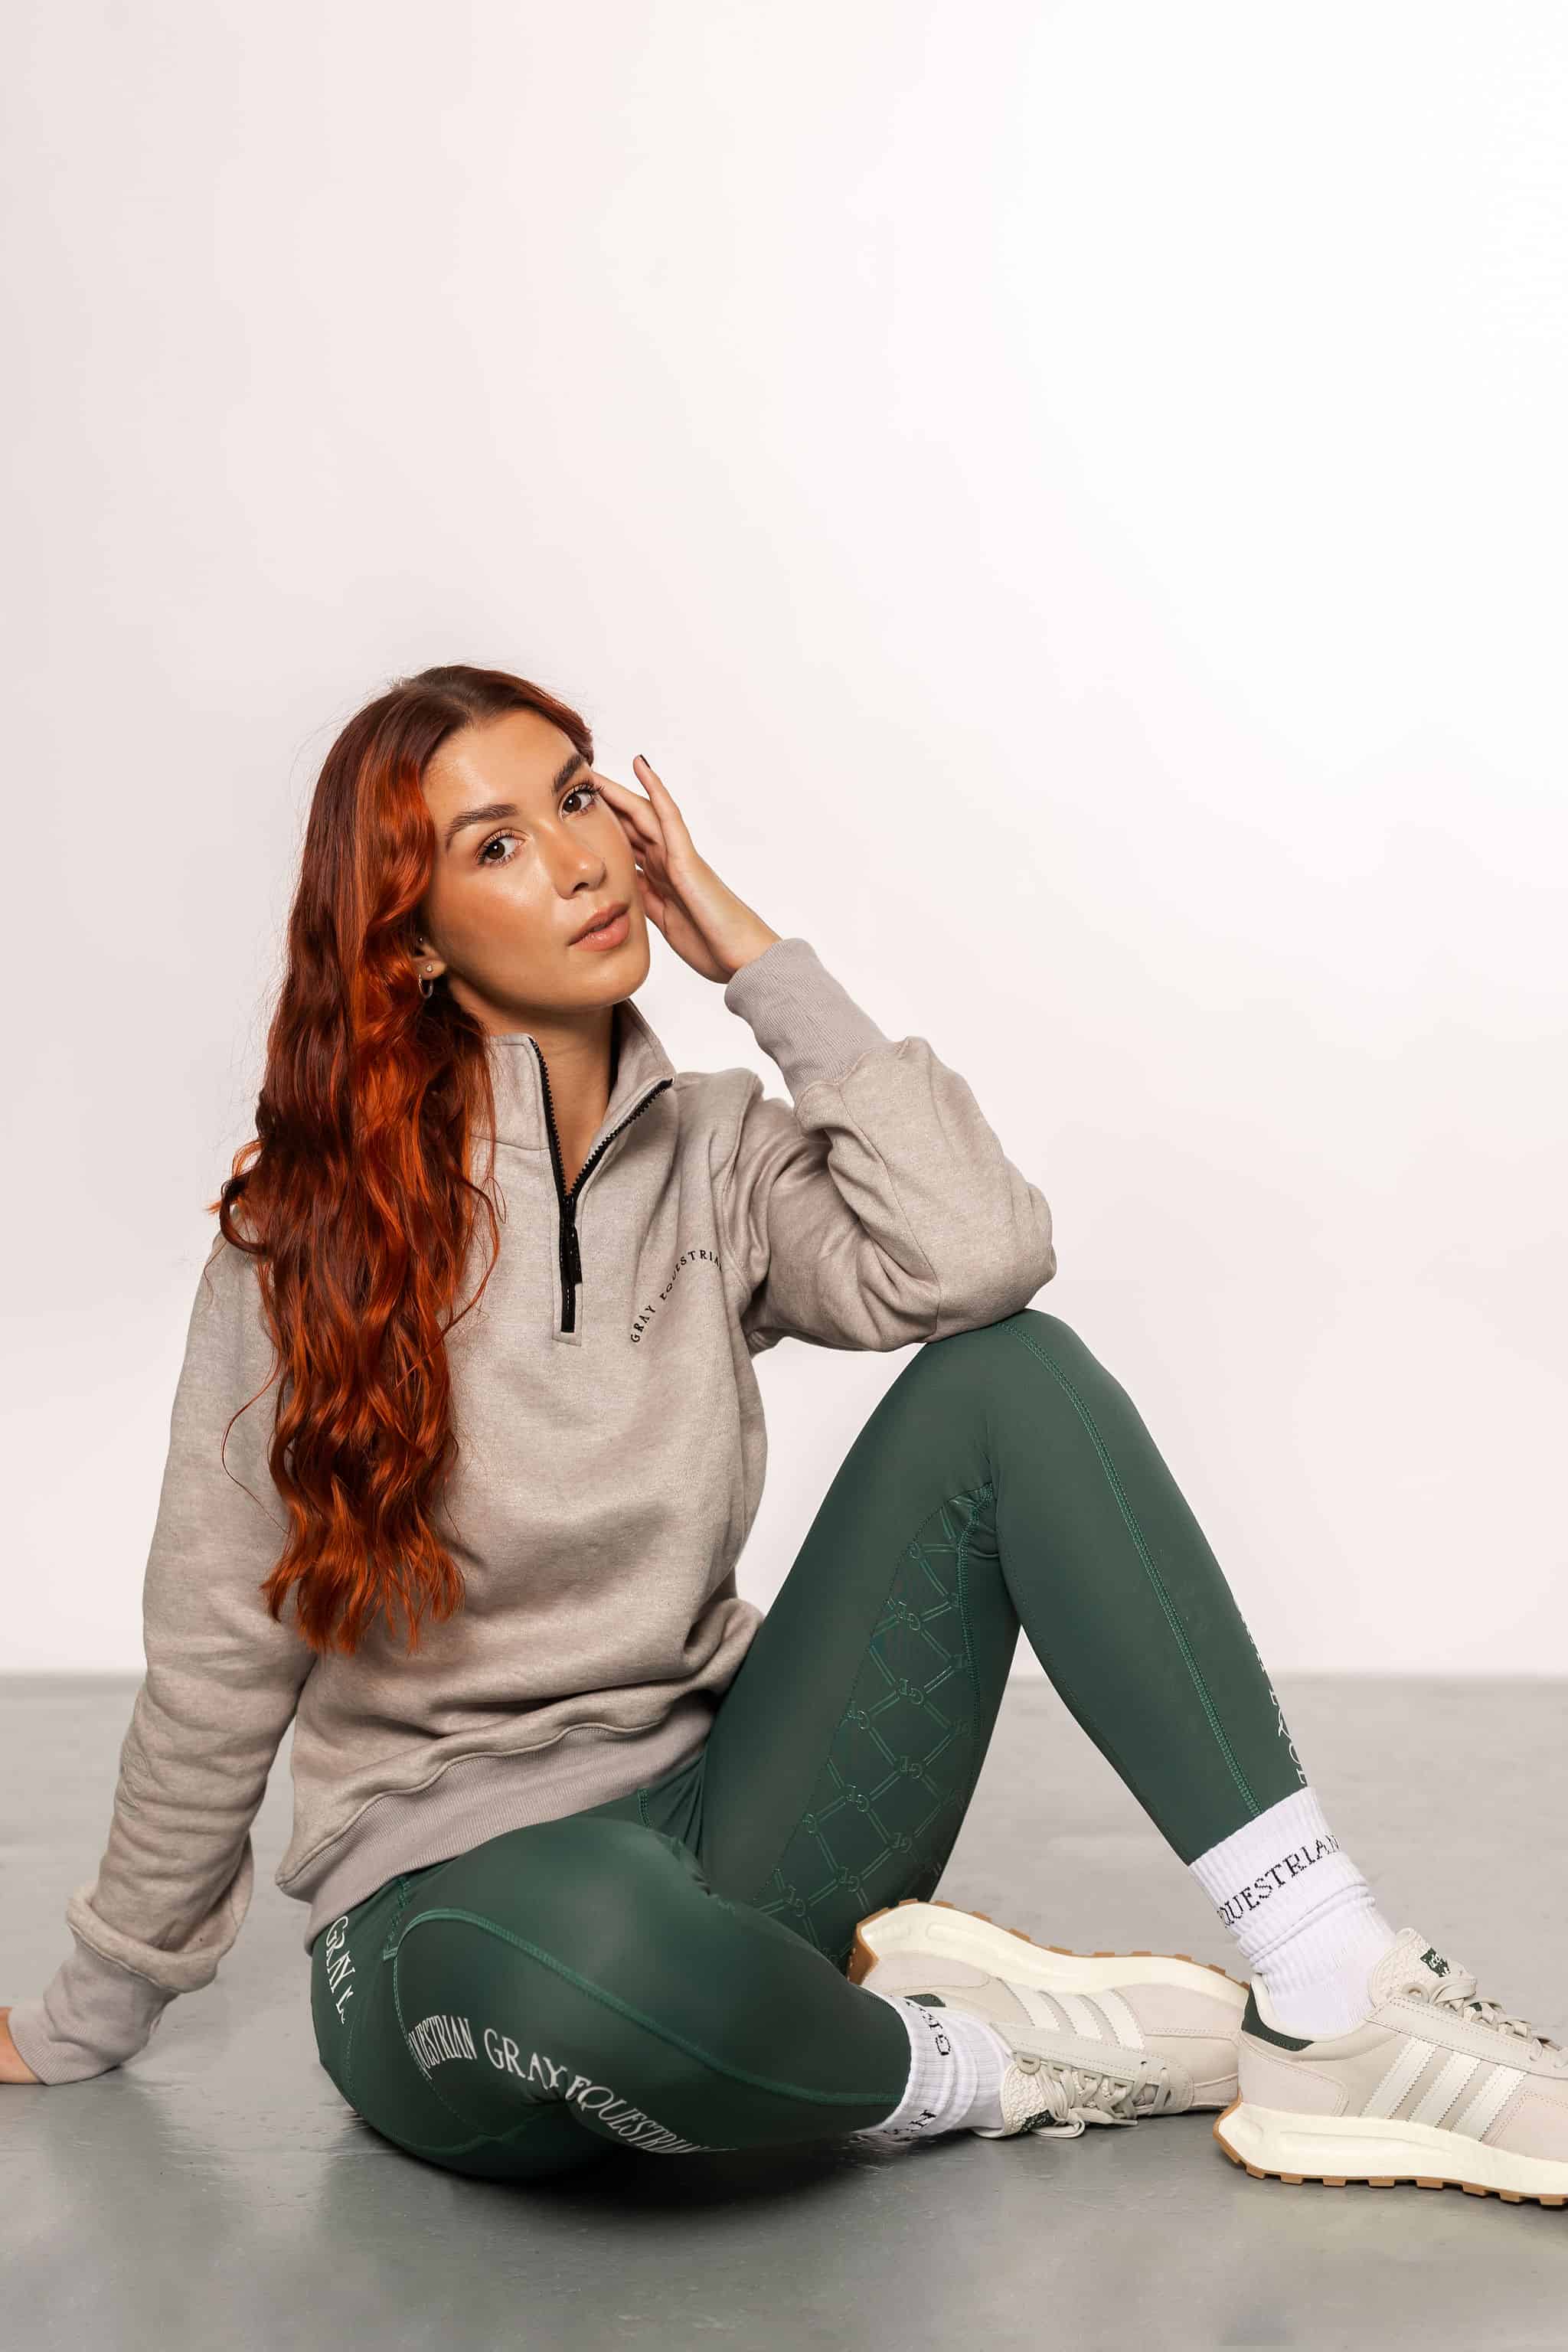 A model wearing our green and grey two toned base layer and matching green riding leggings.